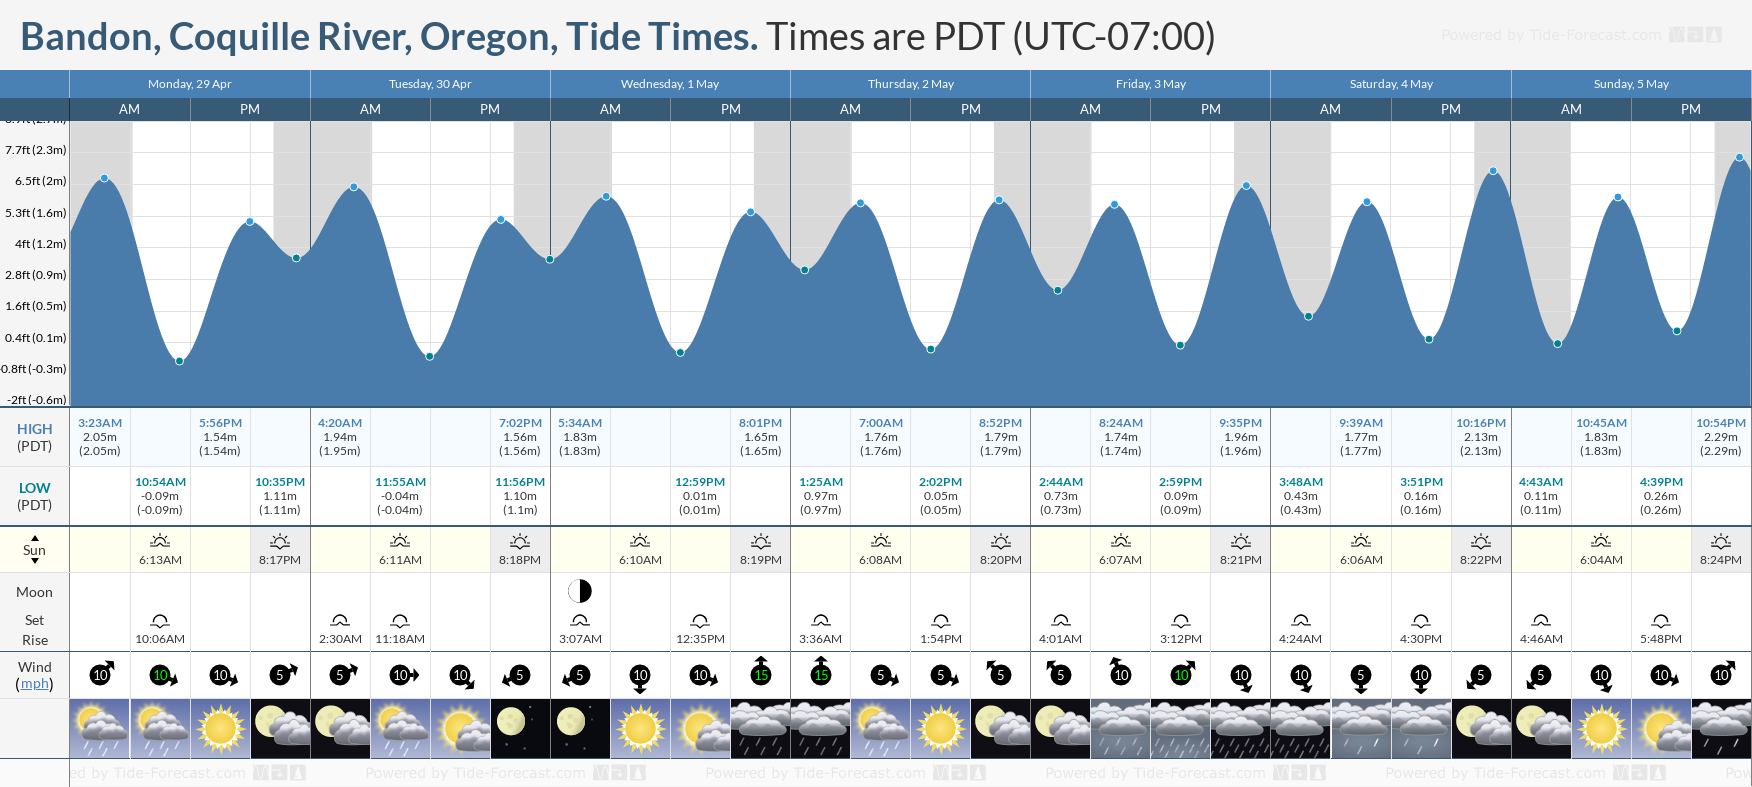 Bandon, Coquille River, Oregon Tide Chart including high and low tide tide times for the next 7 days